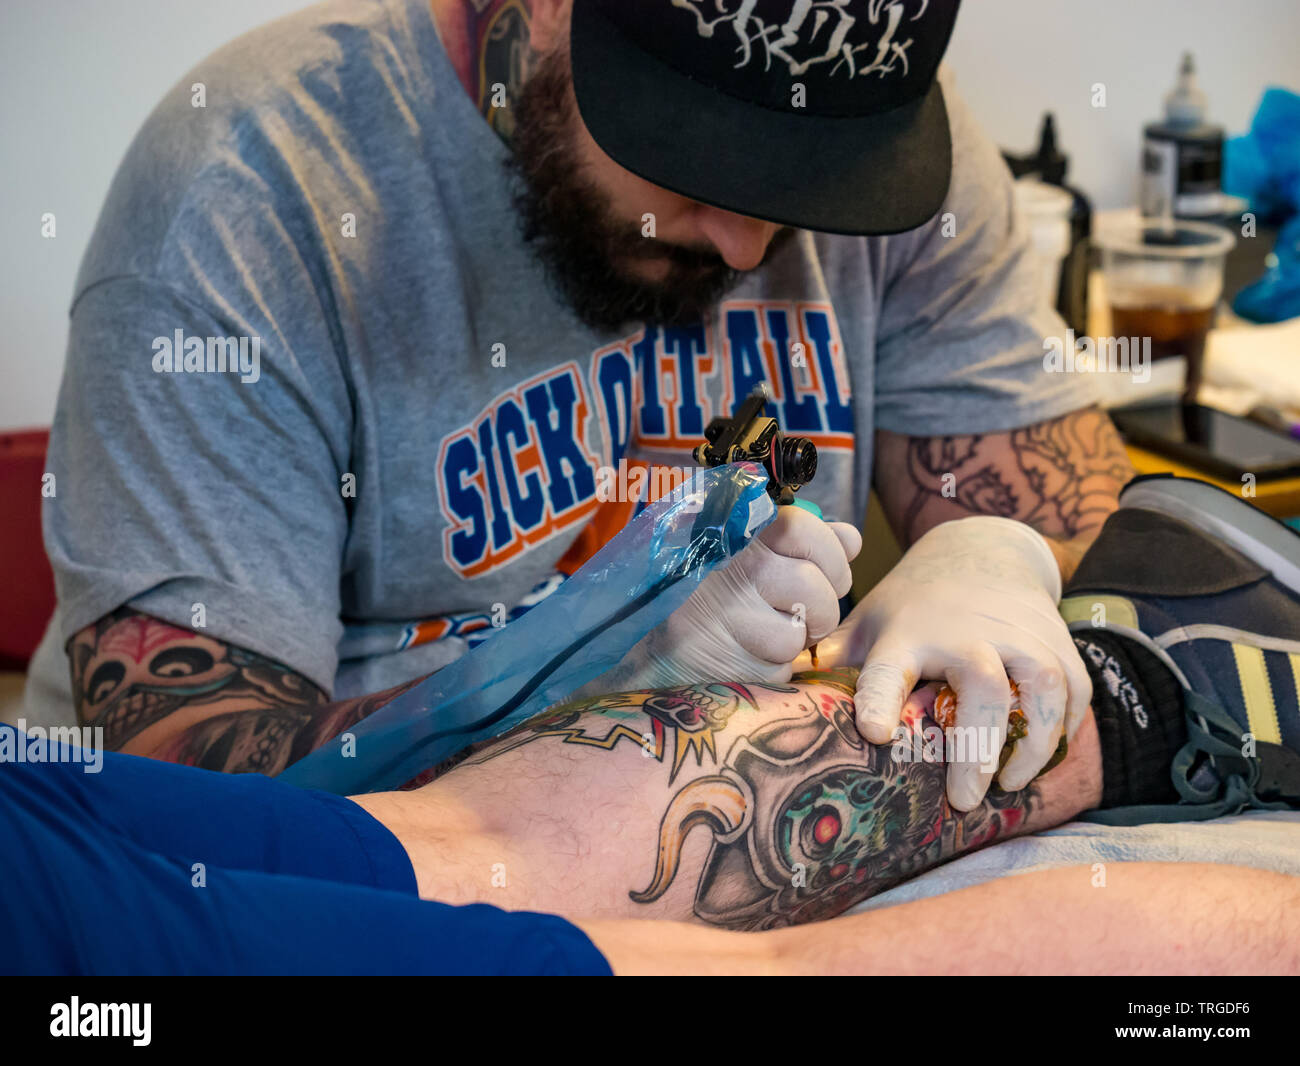 Corn Exchange, Edinburgh, Scotland, UK, 9th Annual Scottish Tattoo  Convention: Enthusiasts and tattoo artists with attendee getting a tattoo  Stock Photo - Alamy